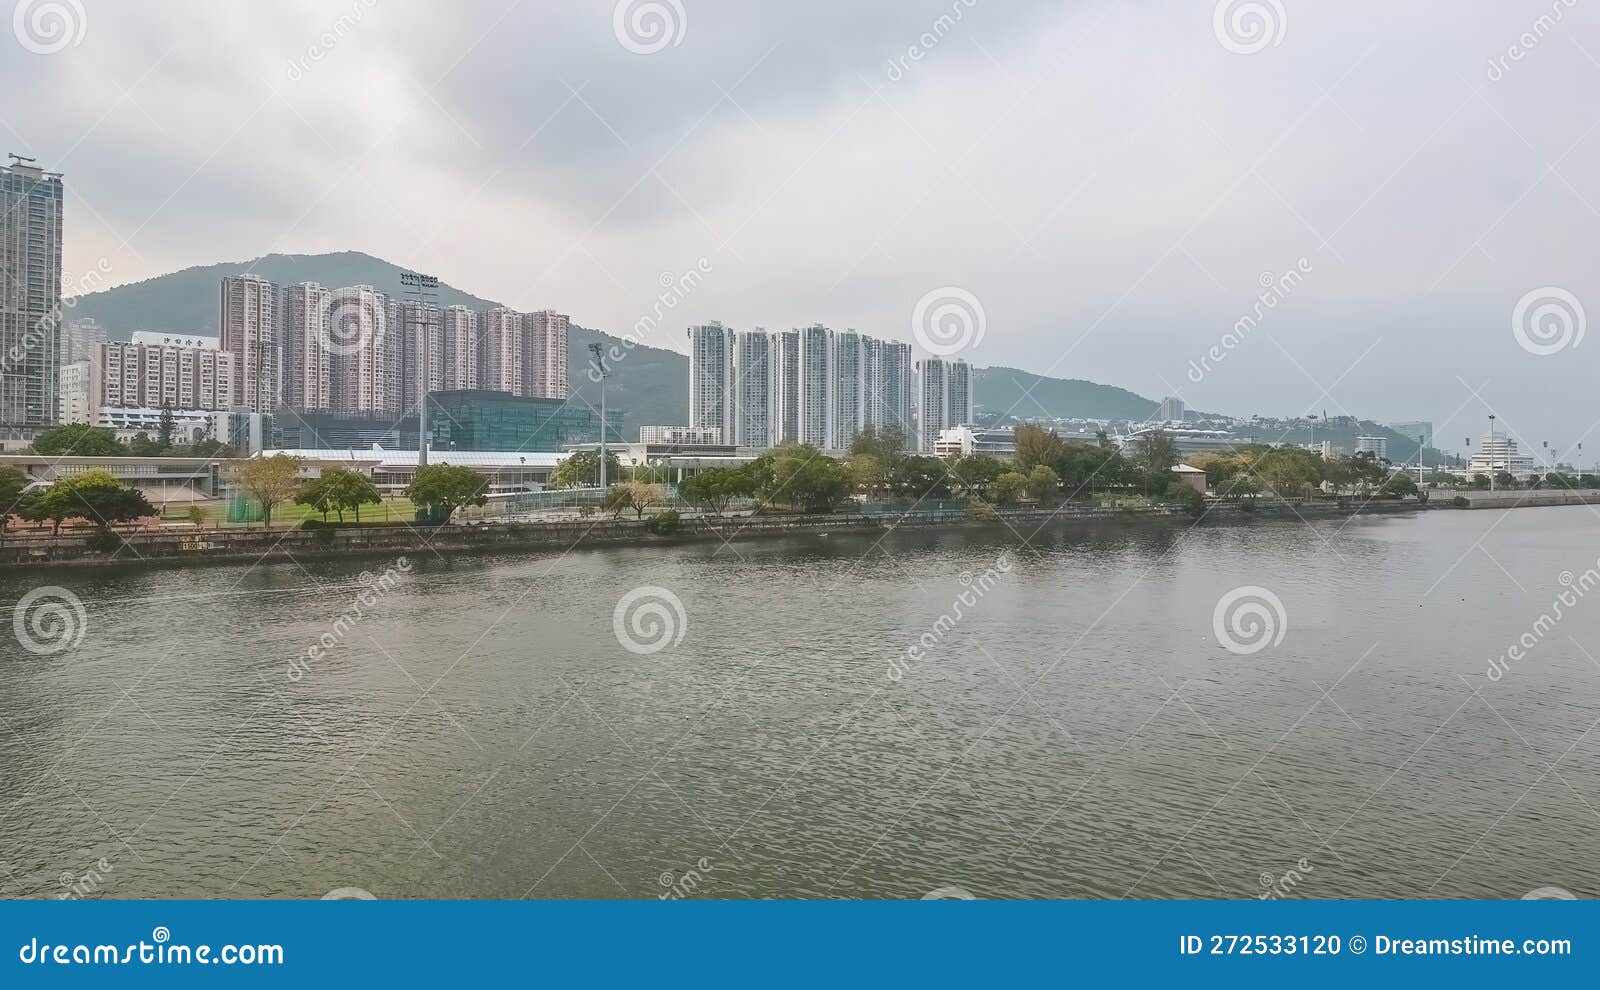 The Landscape Of Shing Mun River Shatin March 18 2 Editorial Image